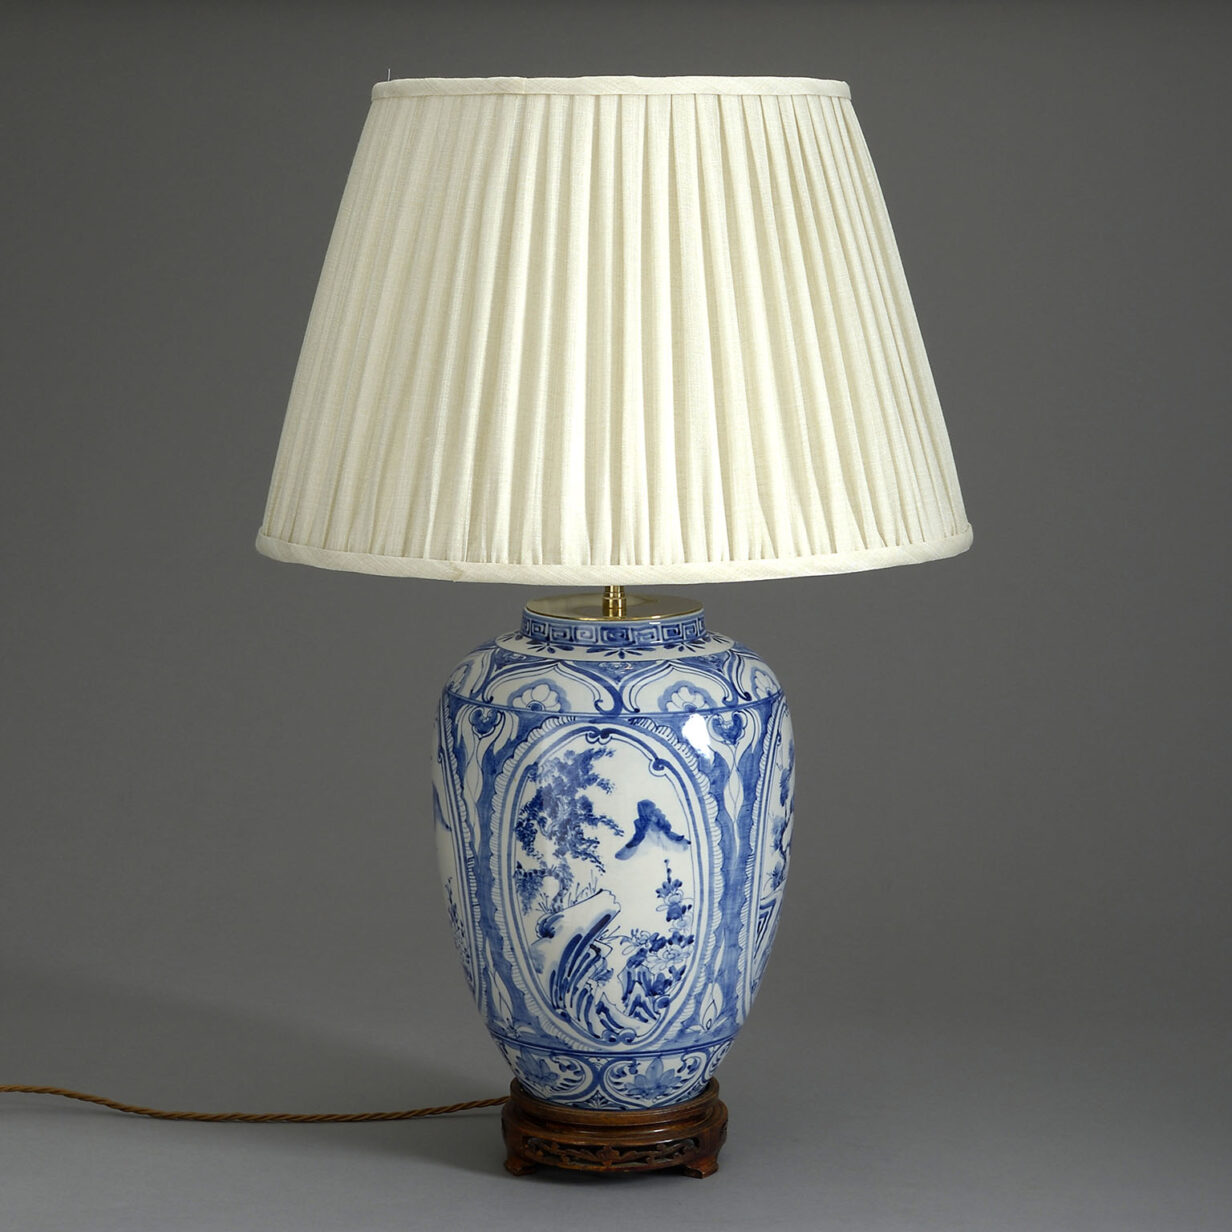 Blue and White Chinese Vase Lamp